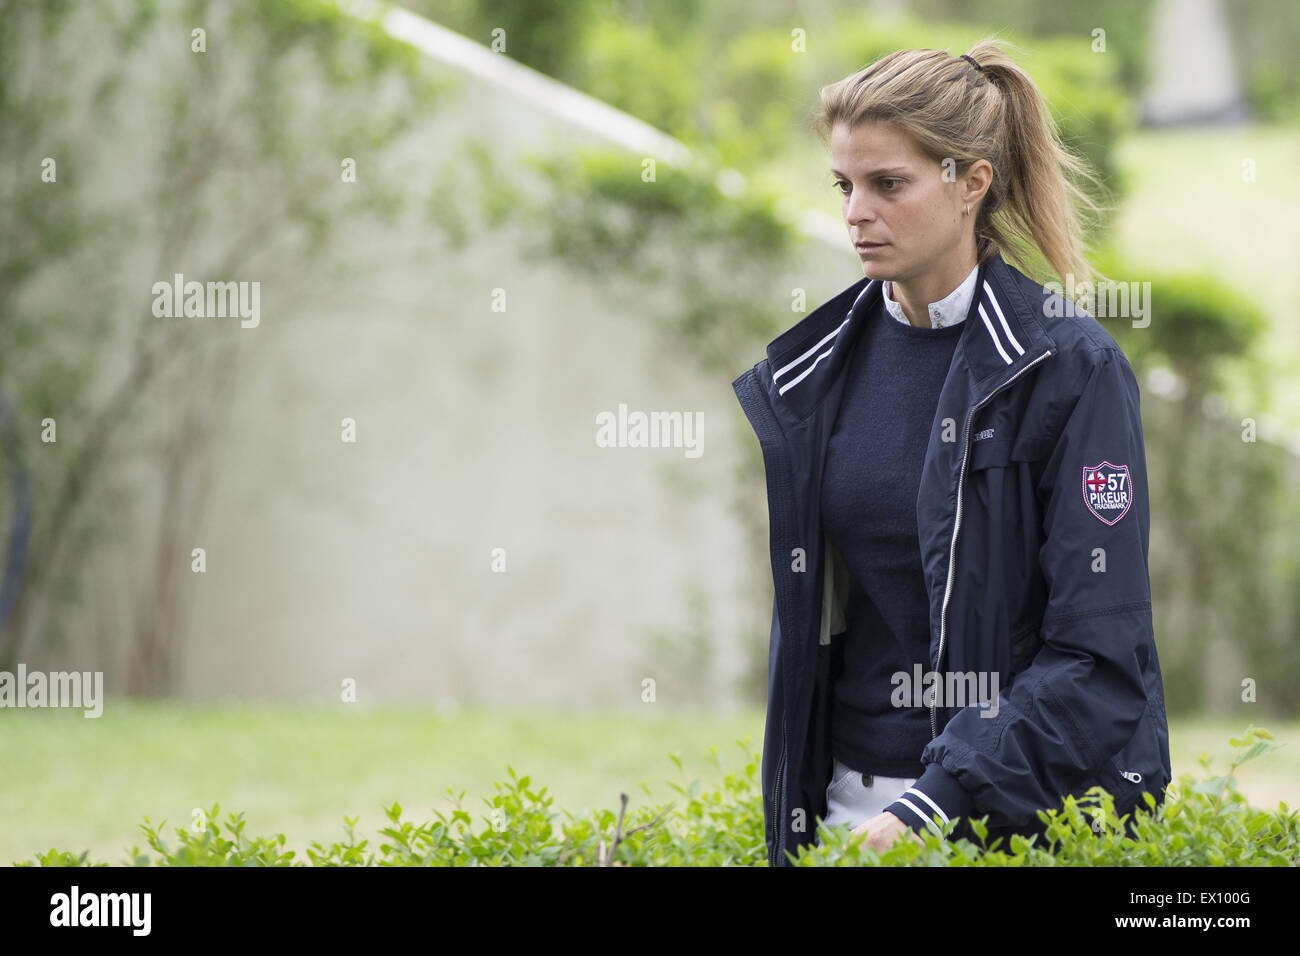 Athina Onassis competes in the Longines Global Champions Tour: Madrid 2015, held at the Campo Villa's Club  Featuring: Athina Onassis Roussel Where: Madrid, Spain When: 02 May 2015 C Stock Photo